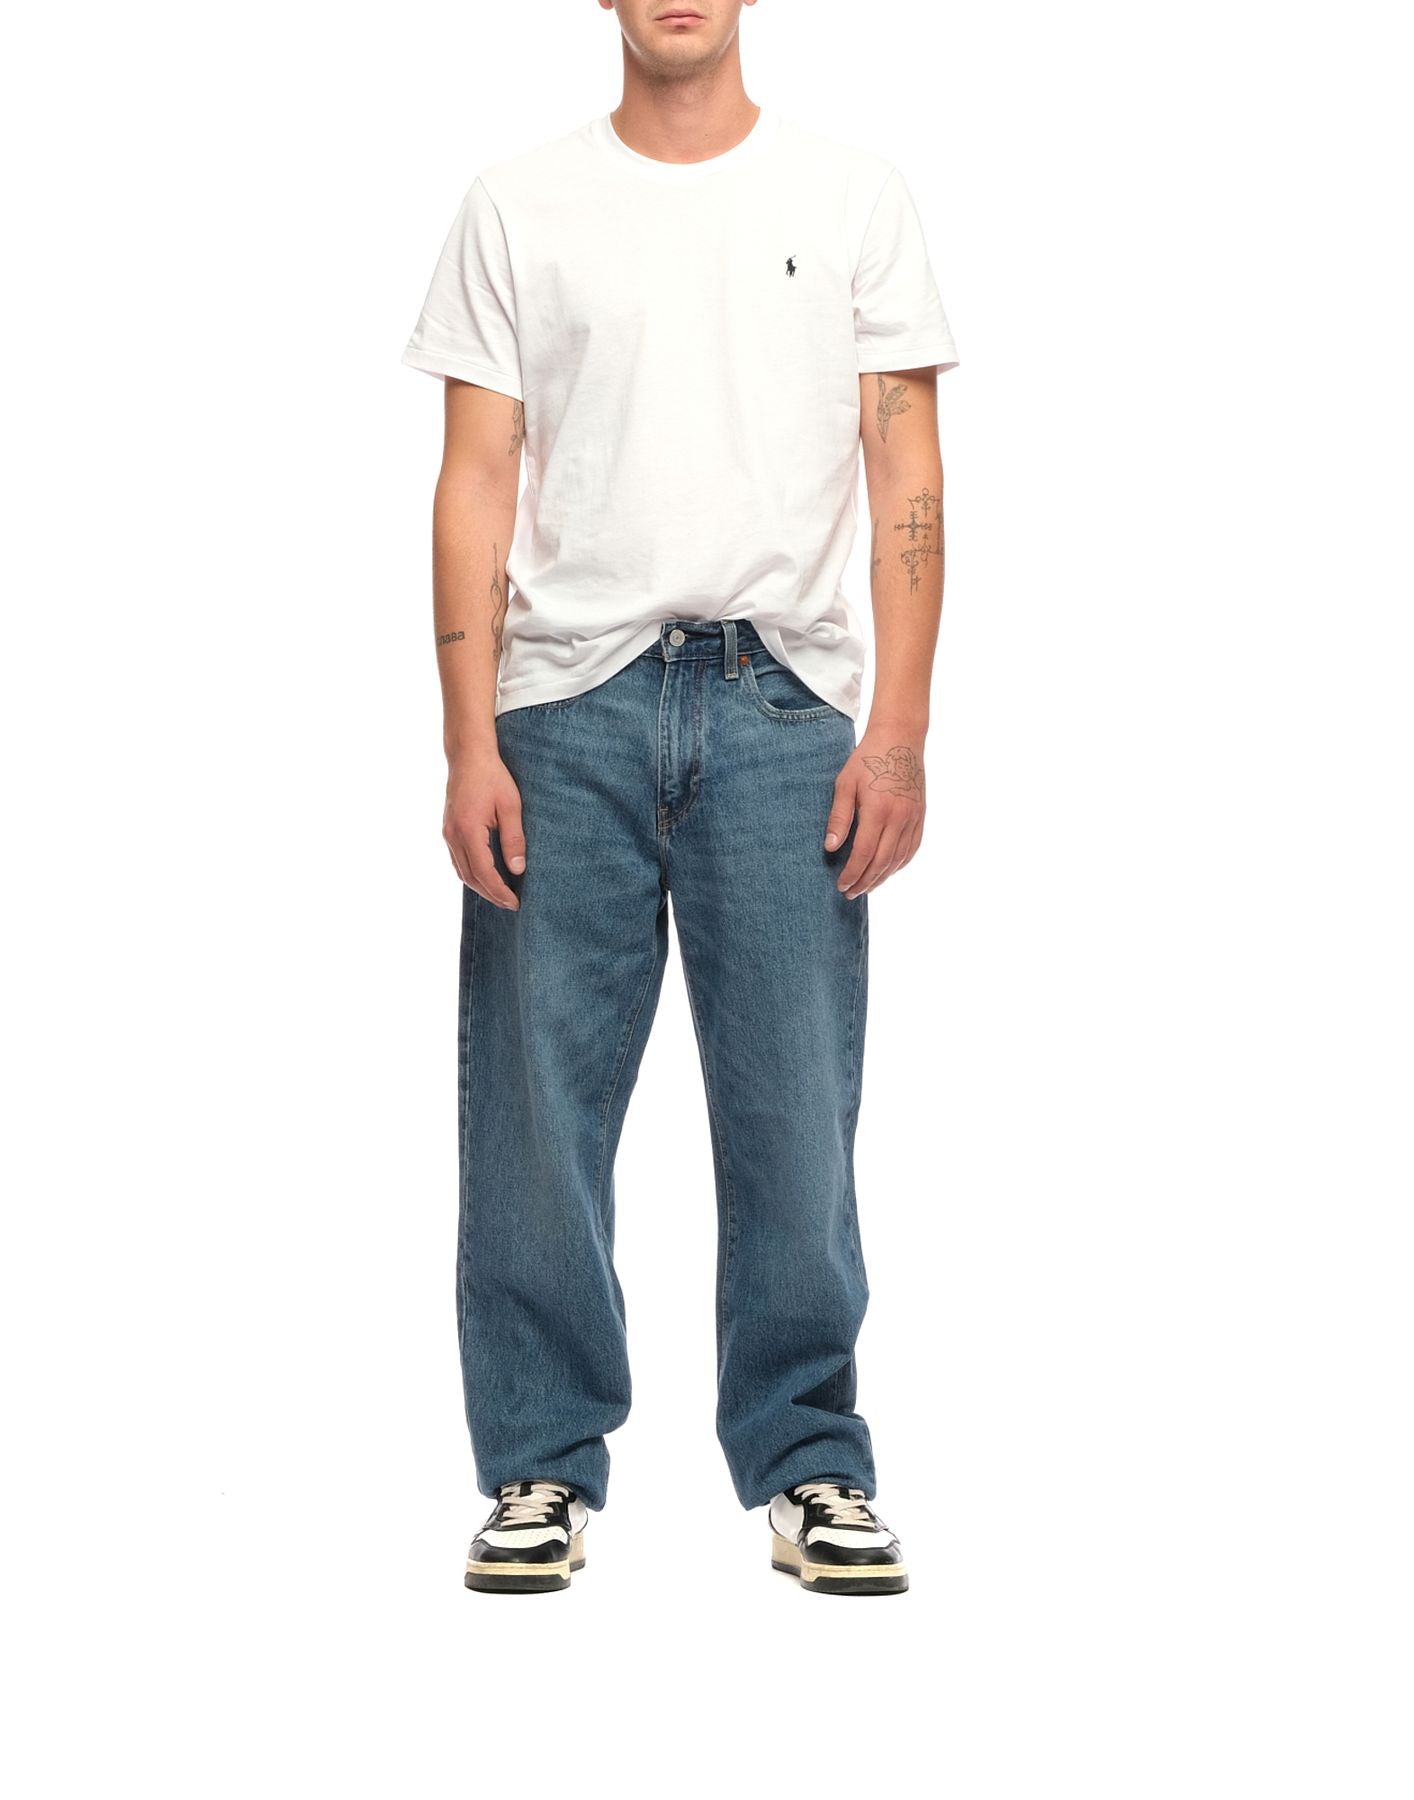 Jeans for man 29037 0050 MERRY AND BRIGHT Levi's